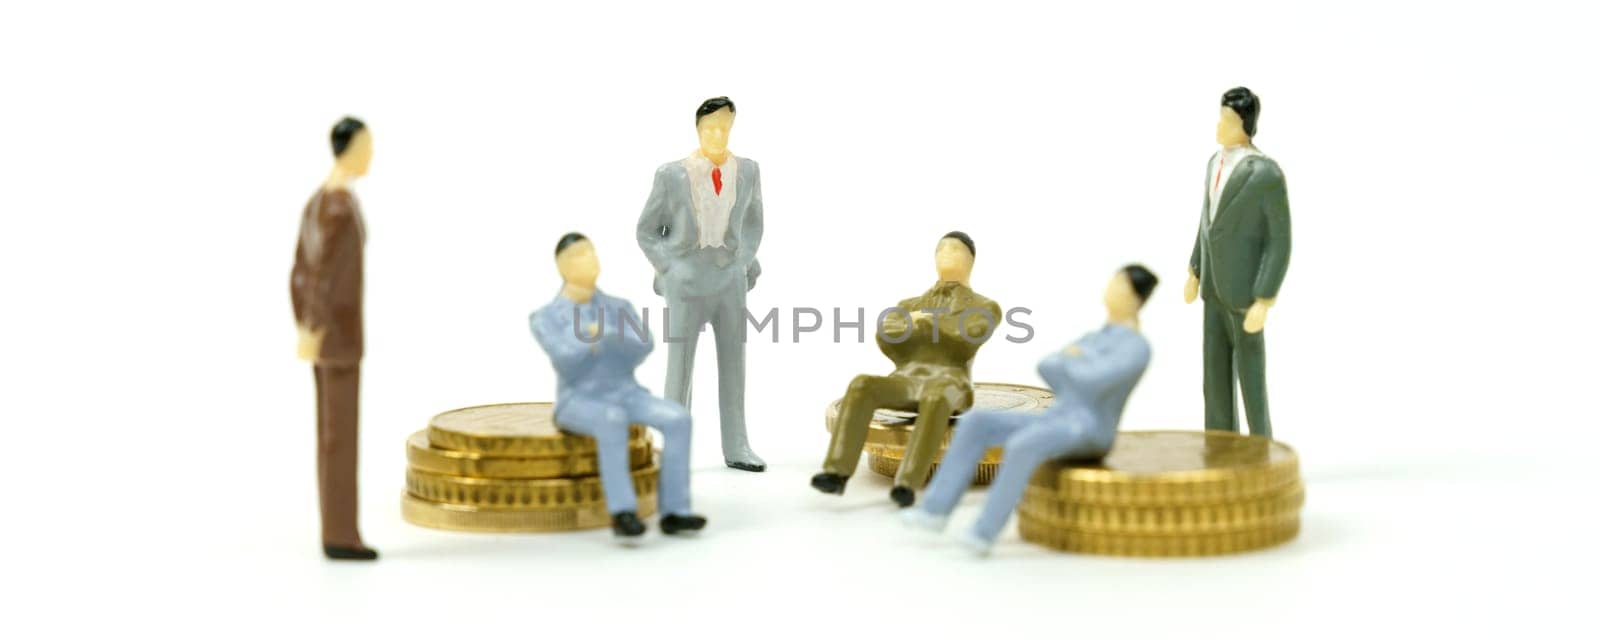 Business and finance concept. On the white surface on the coins and next to them are miniature figures of businessmen conferring.